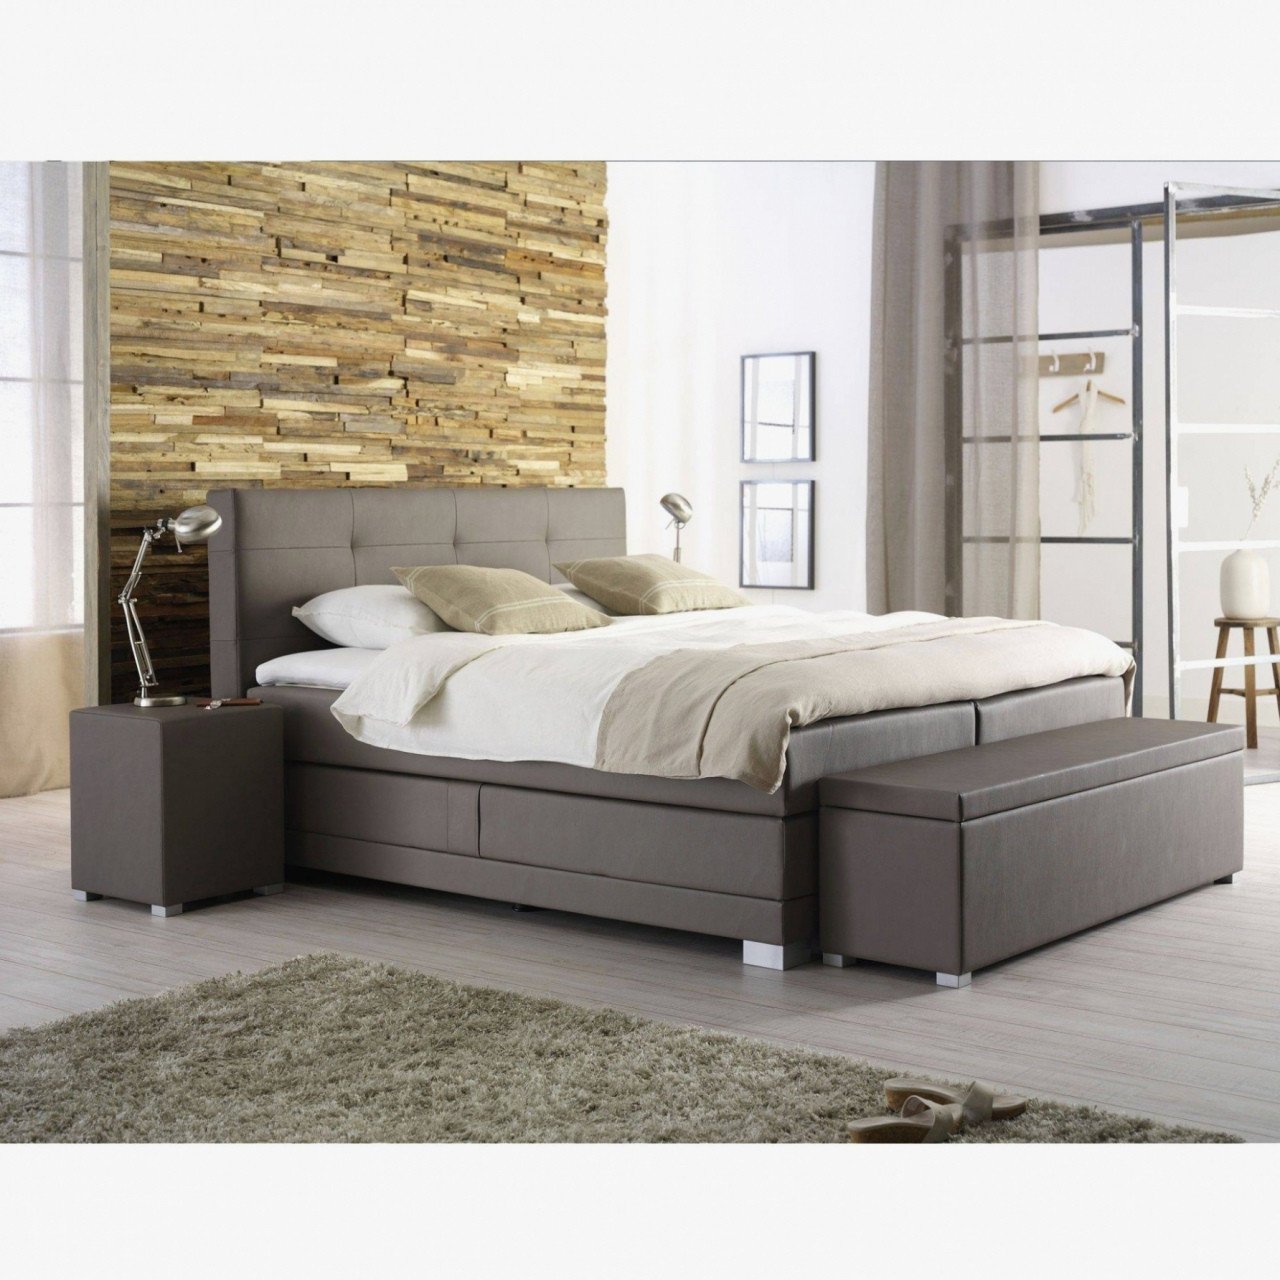 Bedroom Set King Size Beautiful Bed with Drawers Under — Procura Home Blog